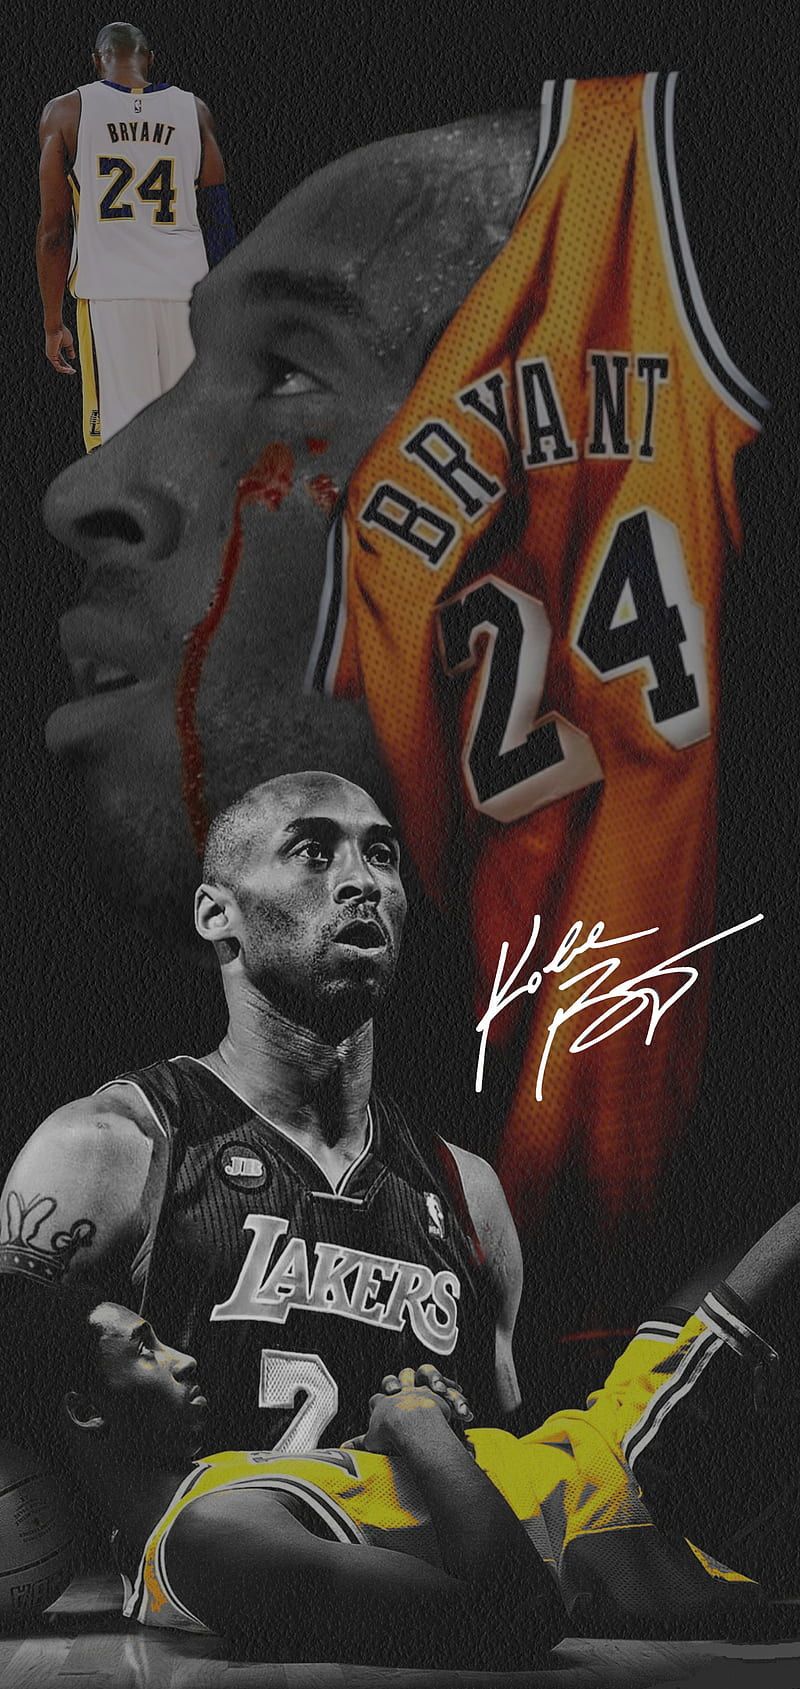 Kobe Bryant wallpaper for iPhone and Android devices. - Kobe Bryant